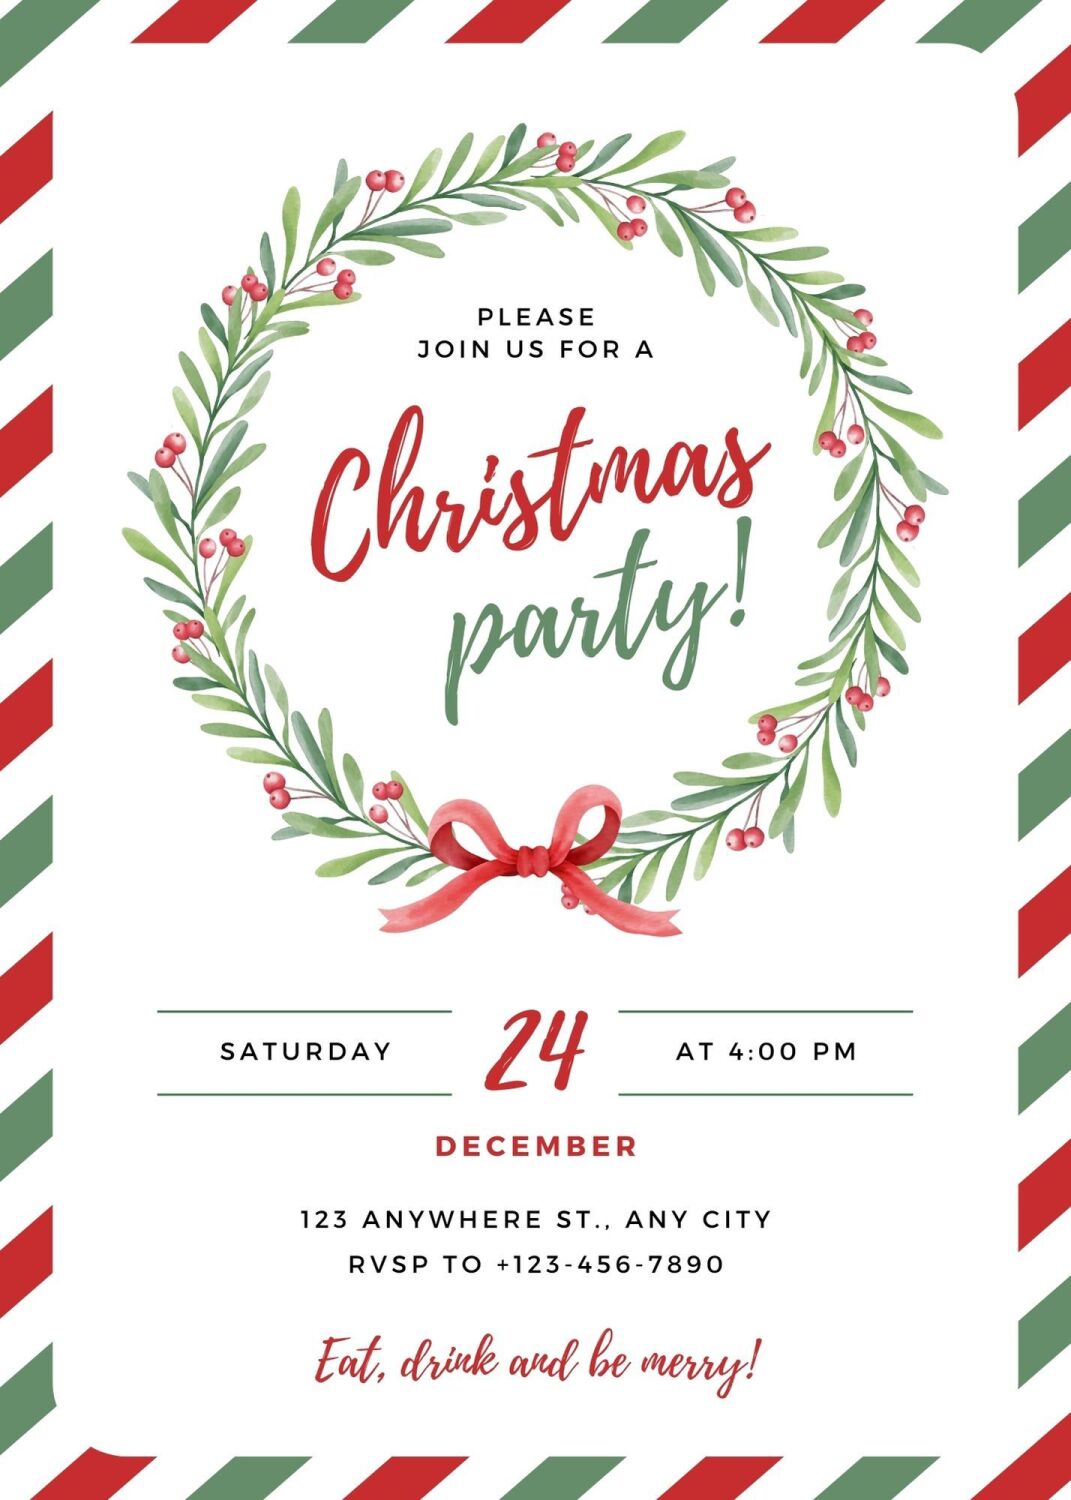 Personalised With Your Details - Customised Christmas Party Invitation PDF 